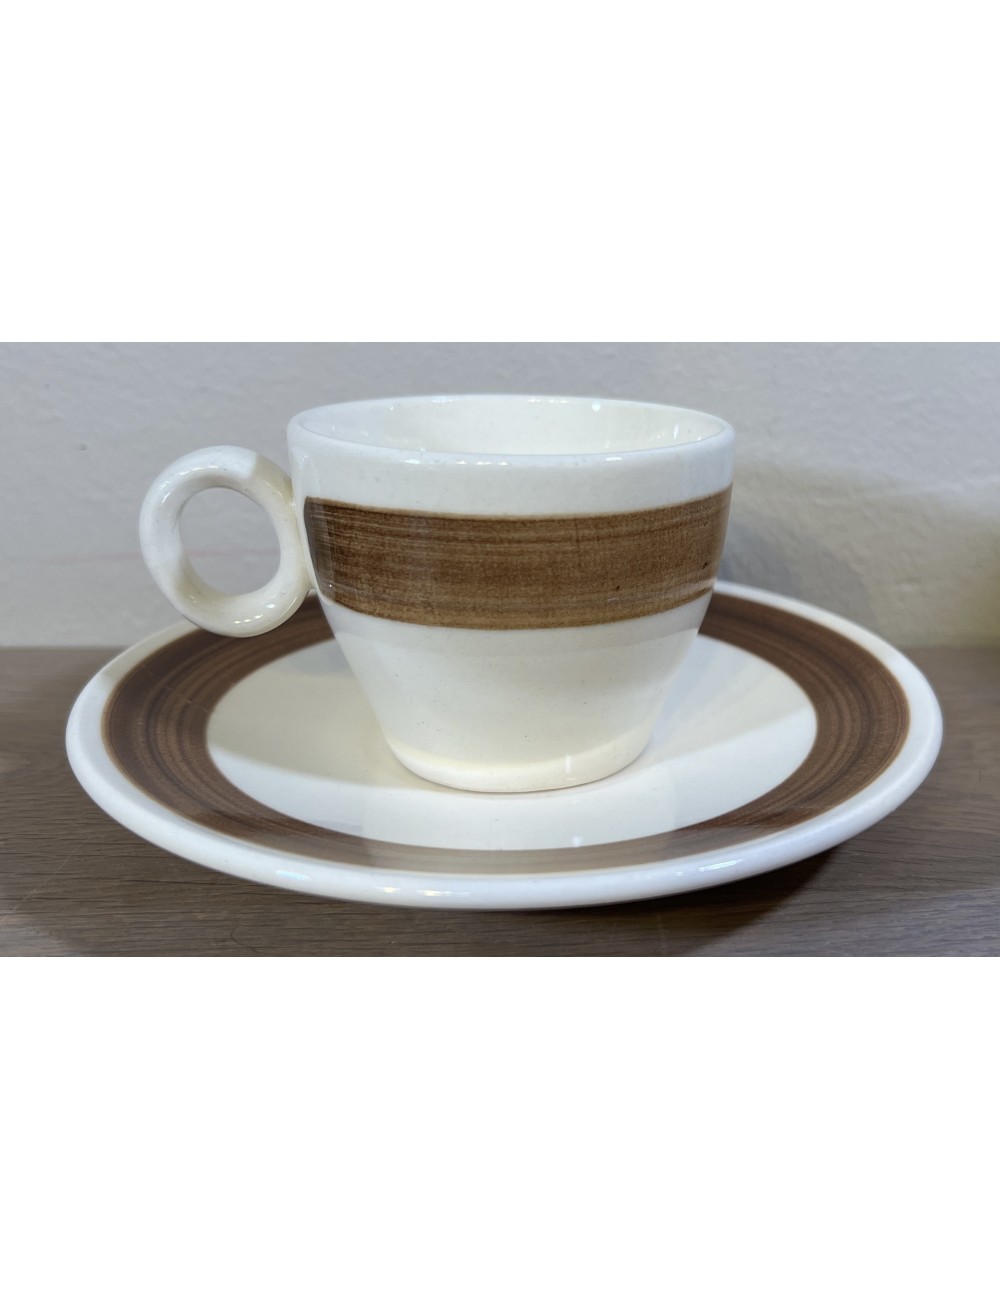 Cup and saucer - Torgau (GDR) - decor with a brown band on a cream background